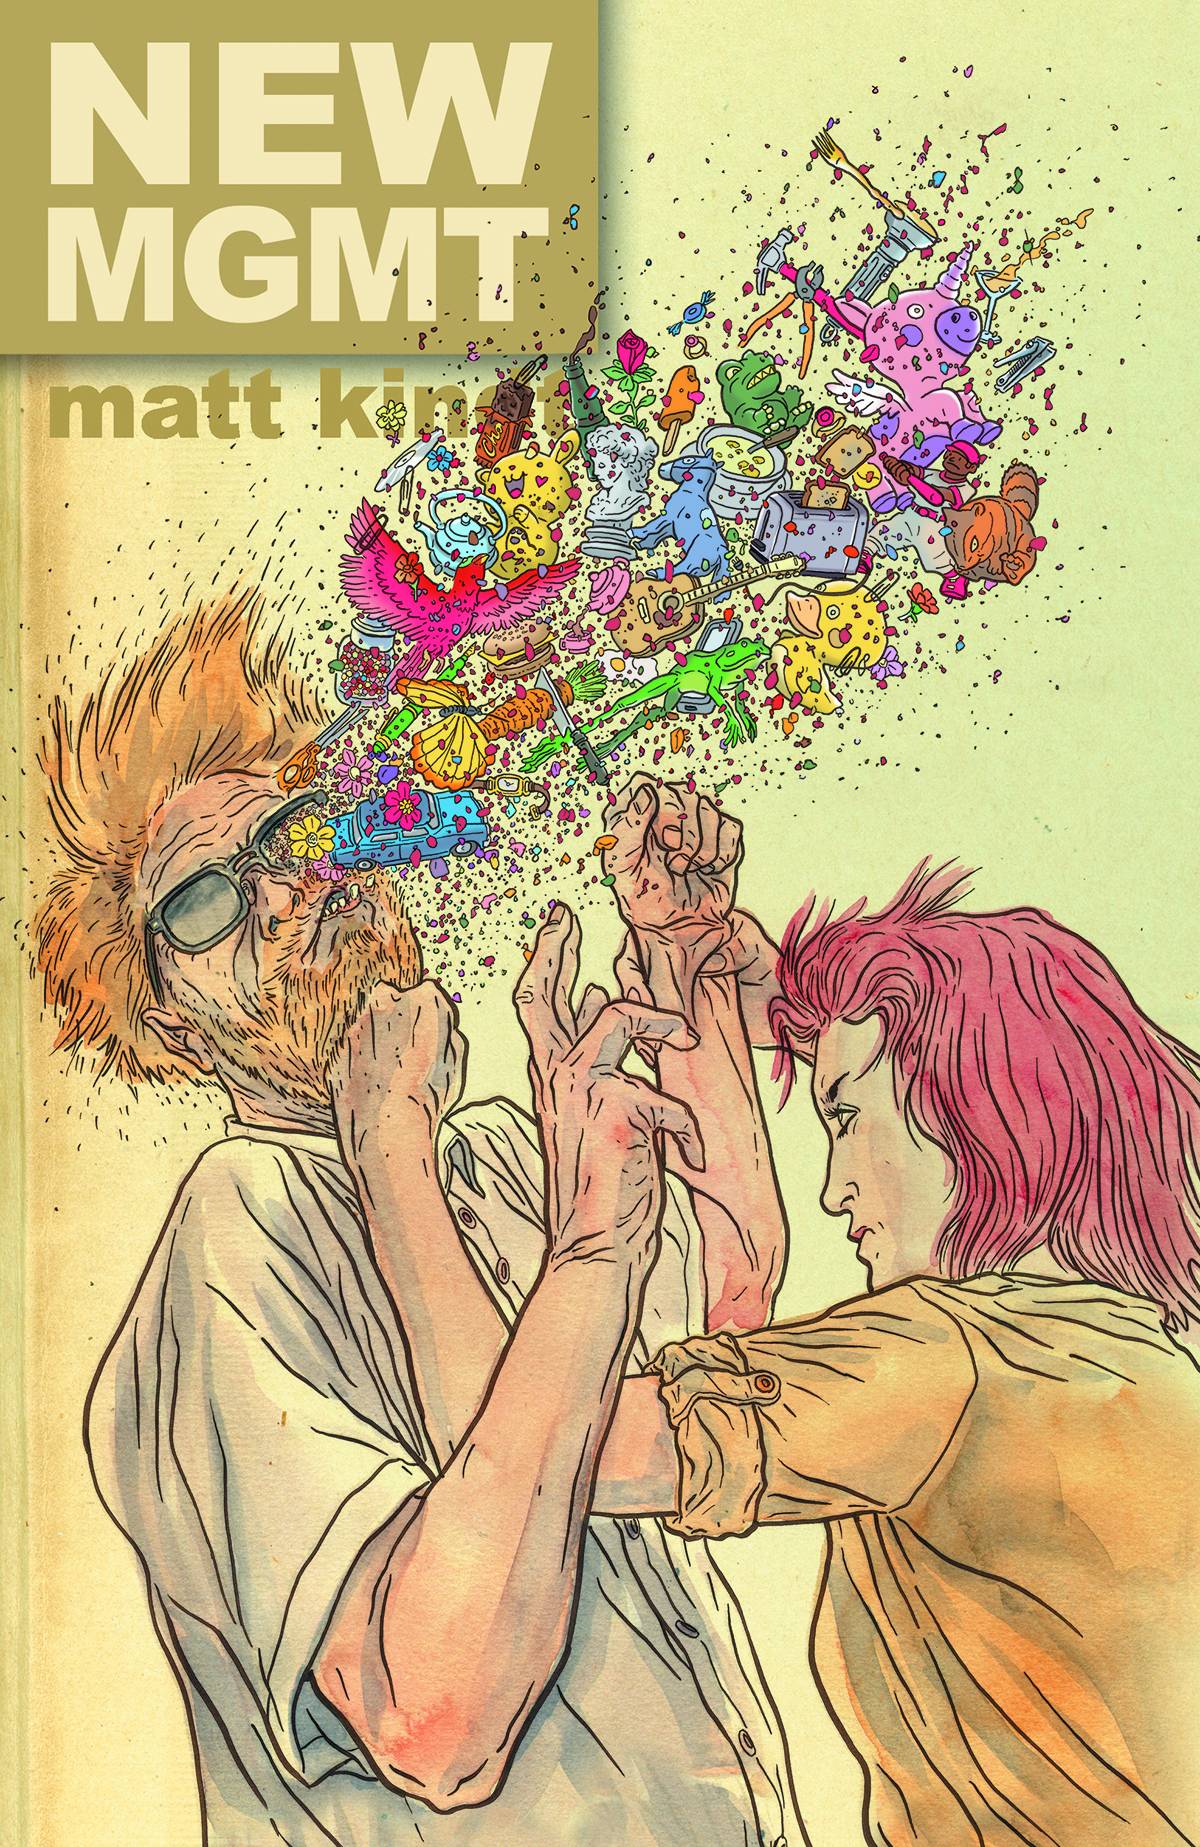 New MGMT #1 Darrow Variant Cover